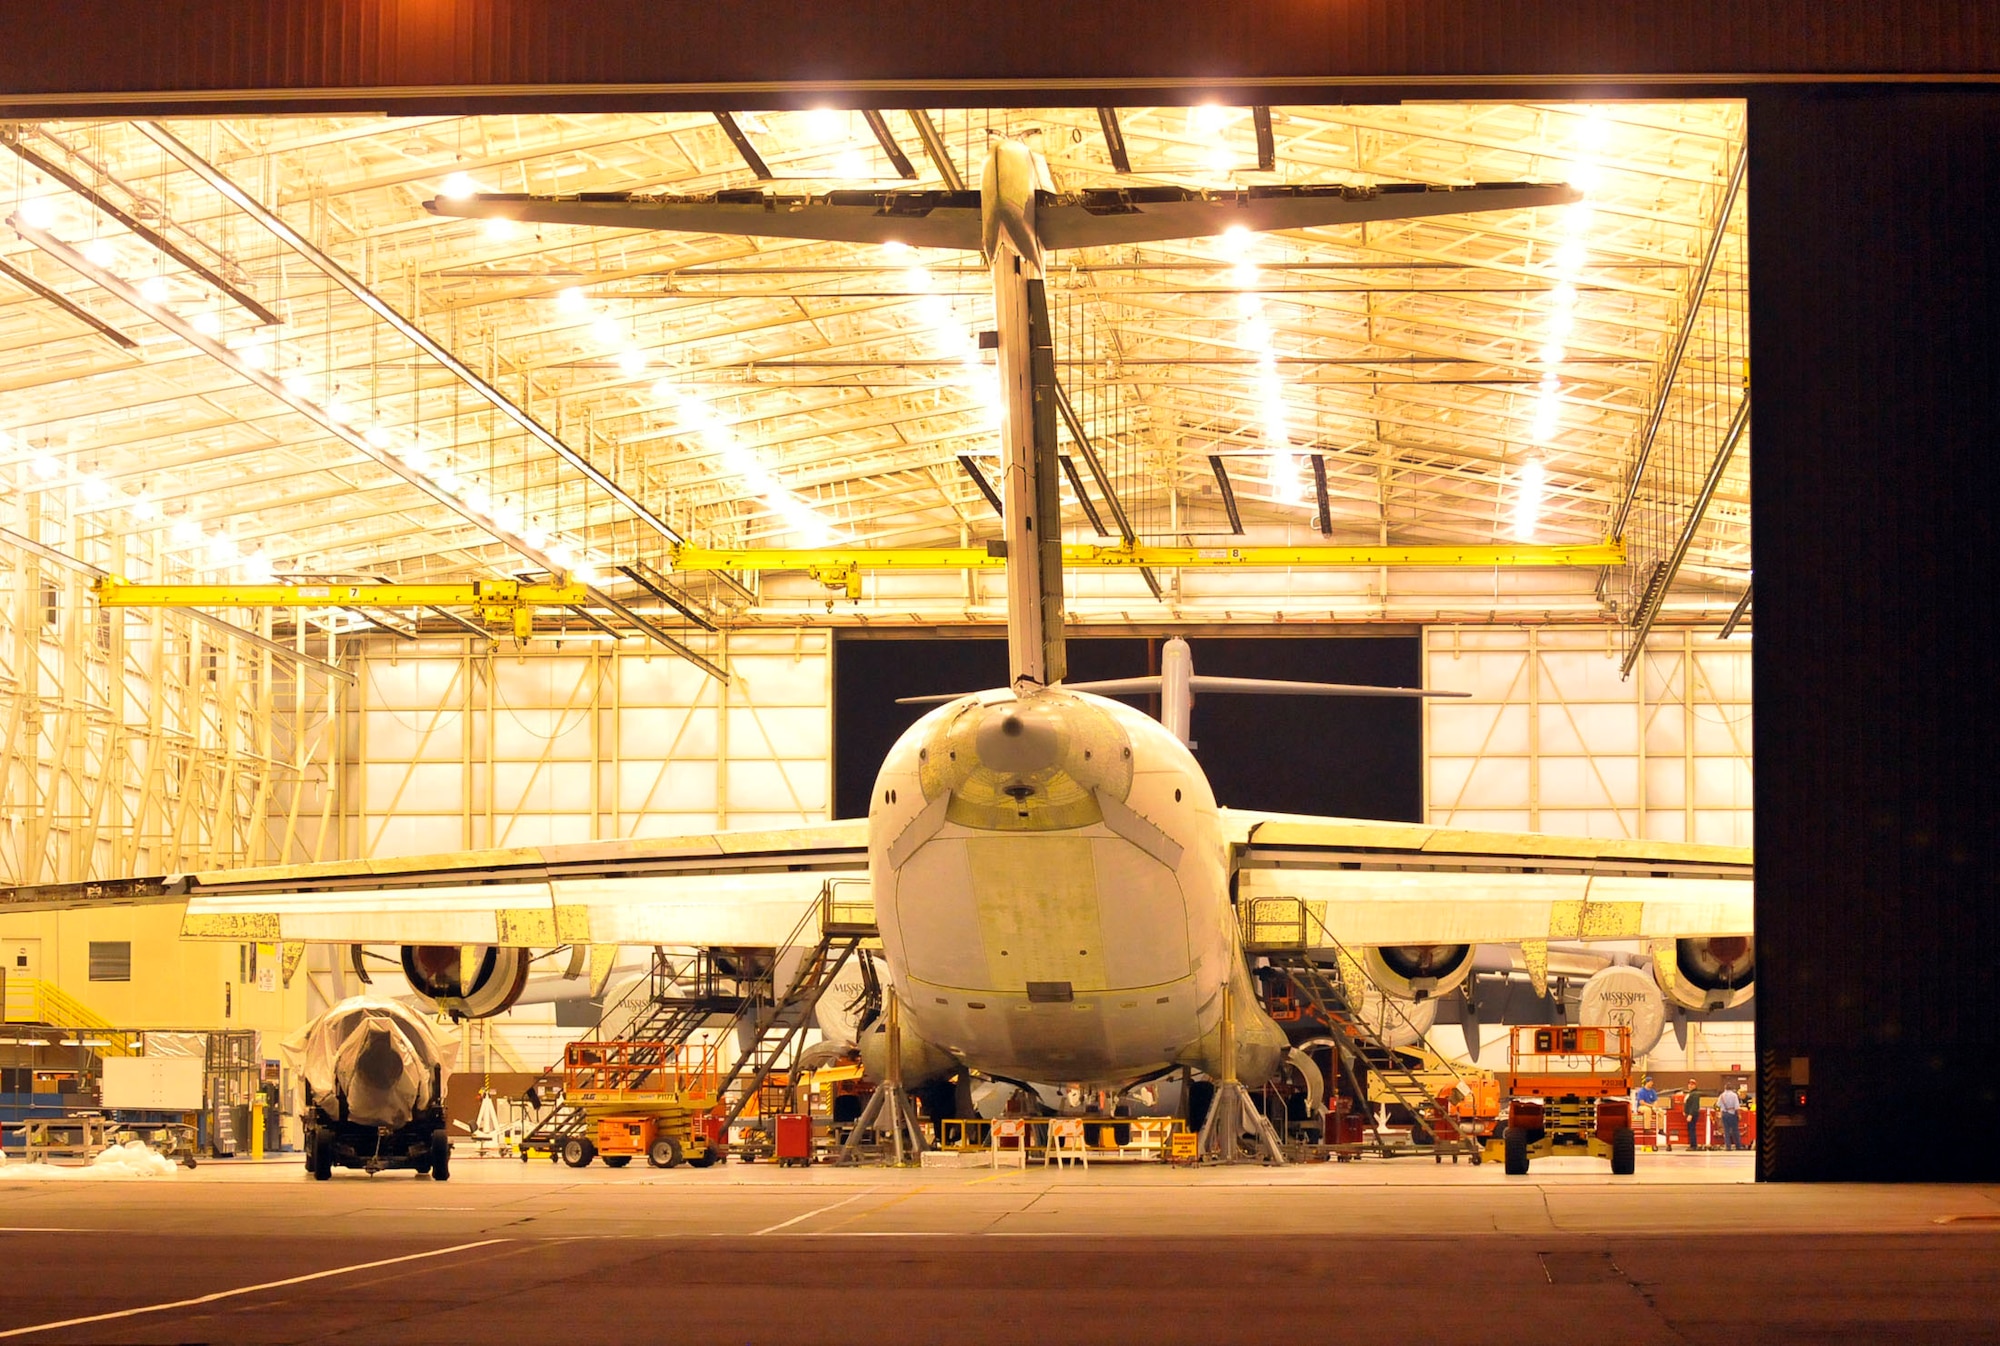 A C-17 undergoing maintenance by the owl shift crew sits in a hangar at Robins. (U. S. Air Force photo by Sue Sapp)